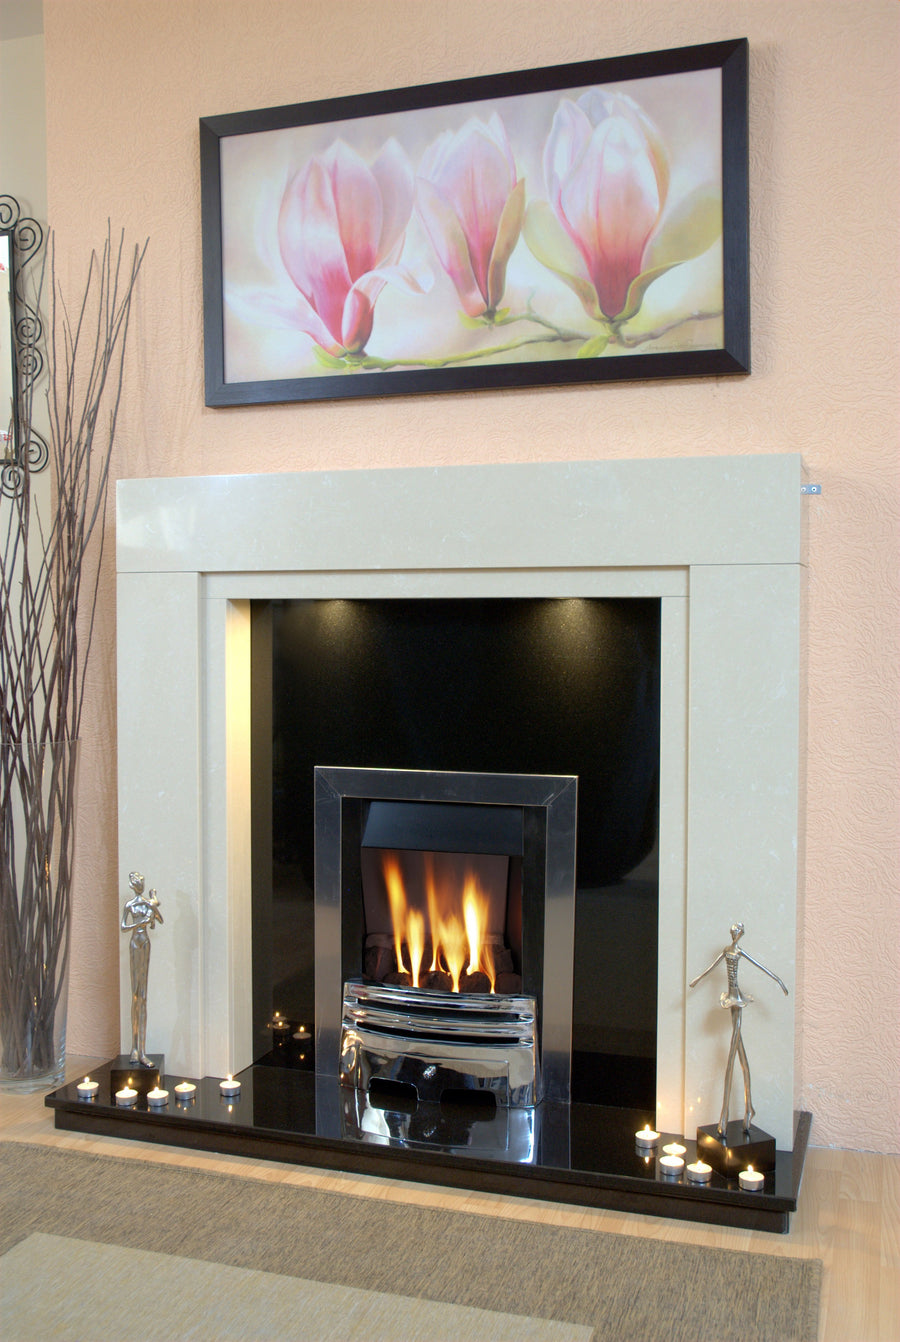 Marble Fireplace Somerset Surround all in One Colour- bespokemarblefireplaces